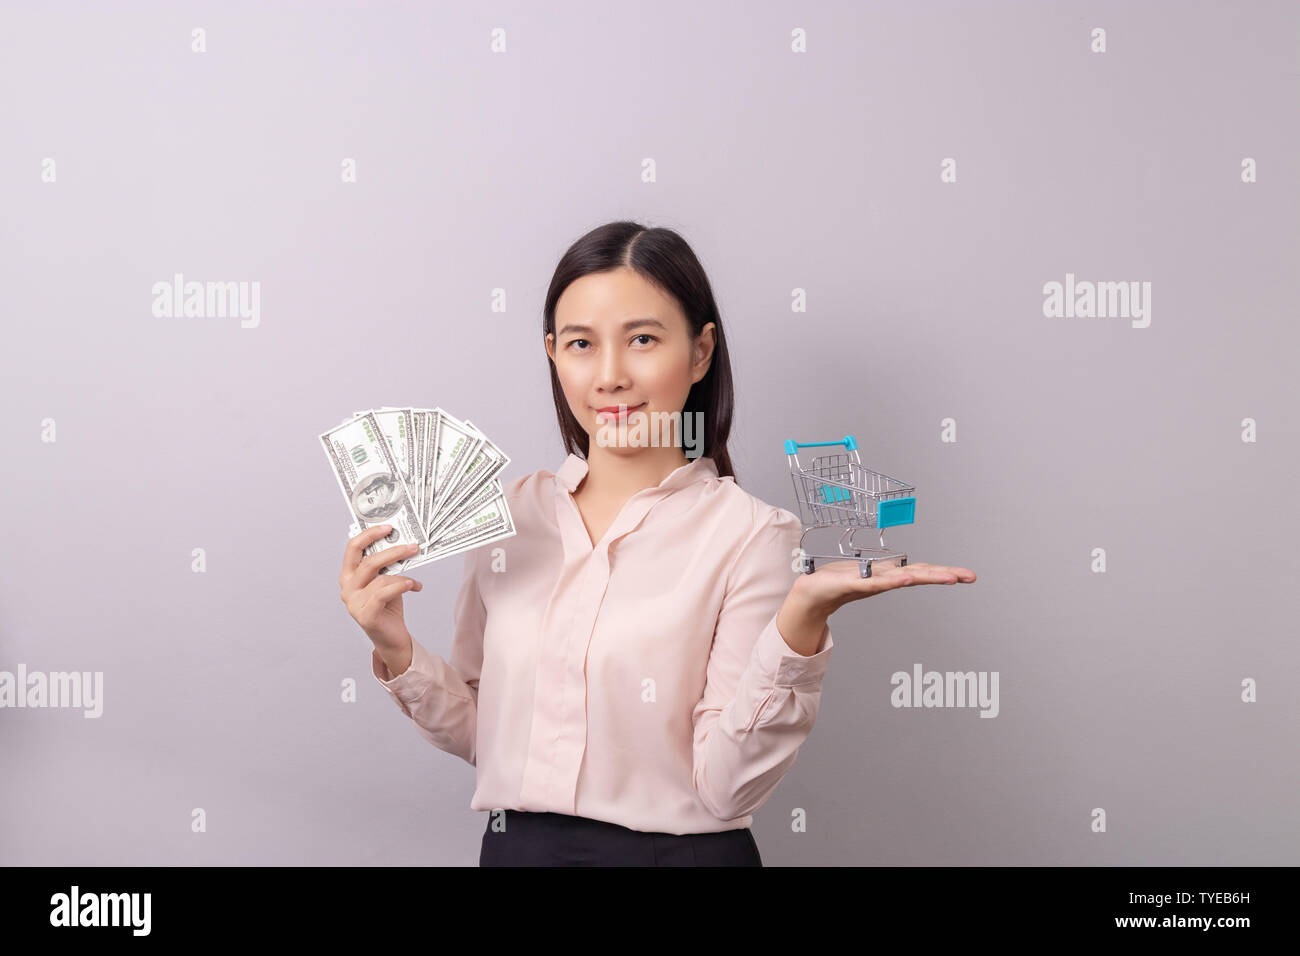 retail commercial business concept, Asian beautiful woman holding banknote money in hand and shopping cart in another hand isolated on grey background Stock Photo